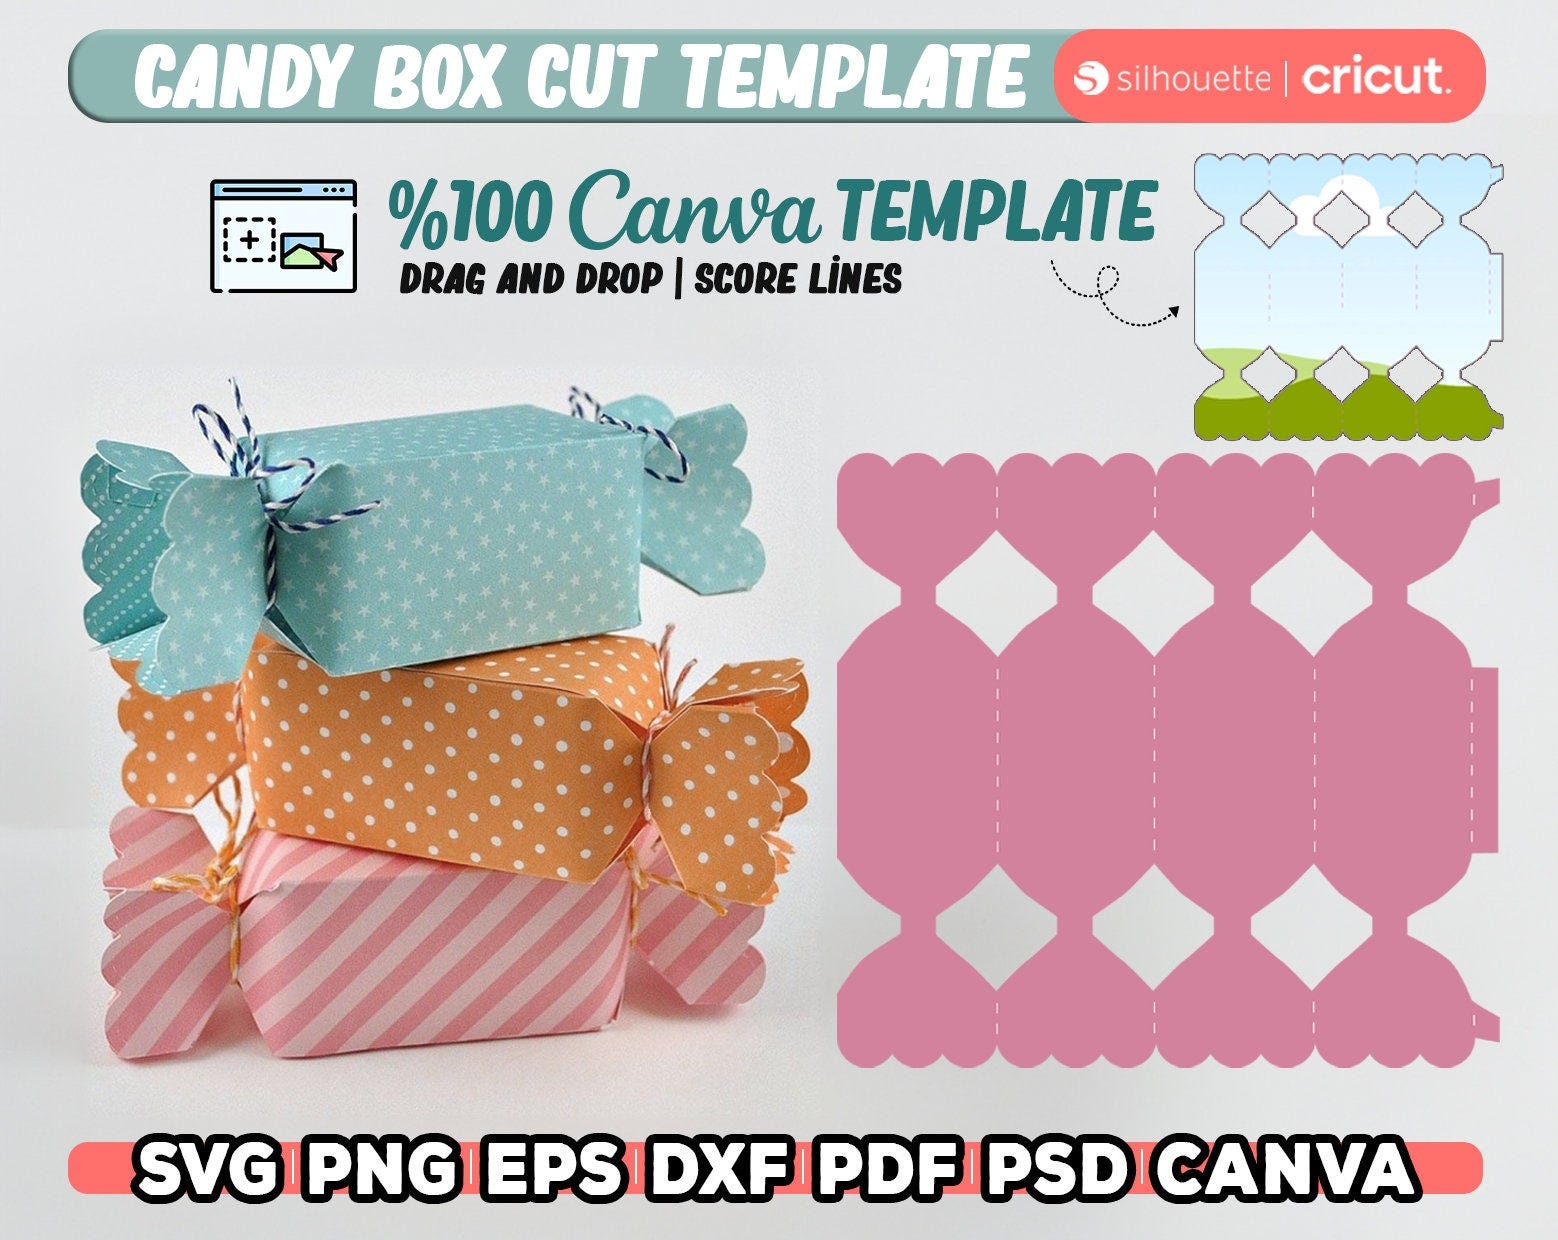 Candy Box Template cut, candy shaped box svg, Candy gift box template, party gift box, box svg for cricut / silhouette, Instant Download